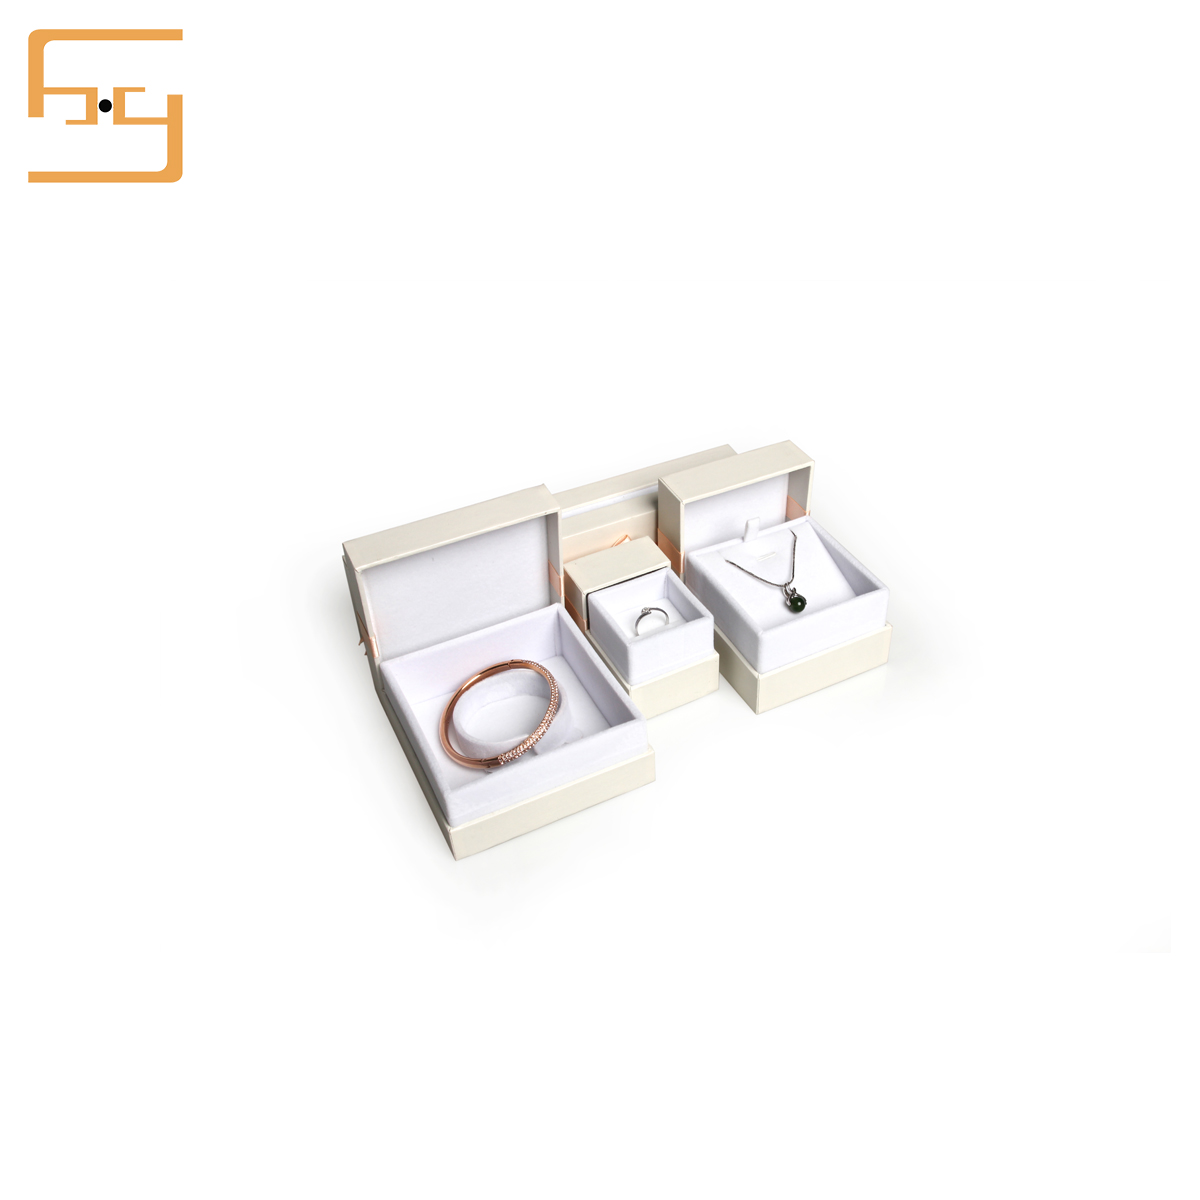 2019 Luxury jewelry box for jewelry packaging sets, Shenzhen manufacturer jewelry gift packaging 5